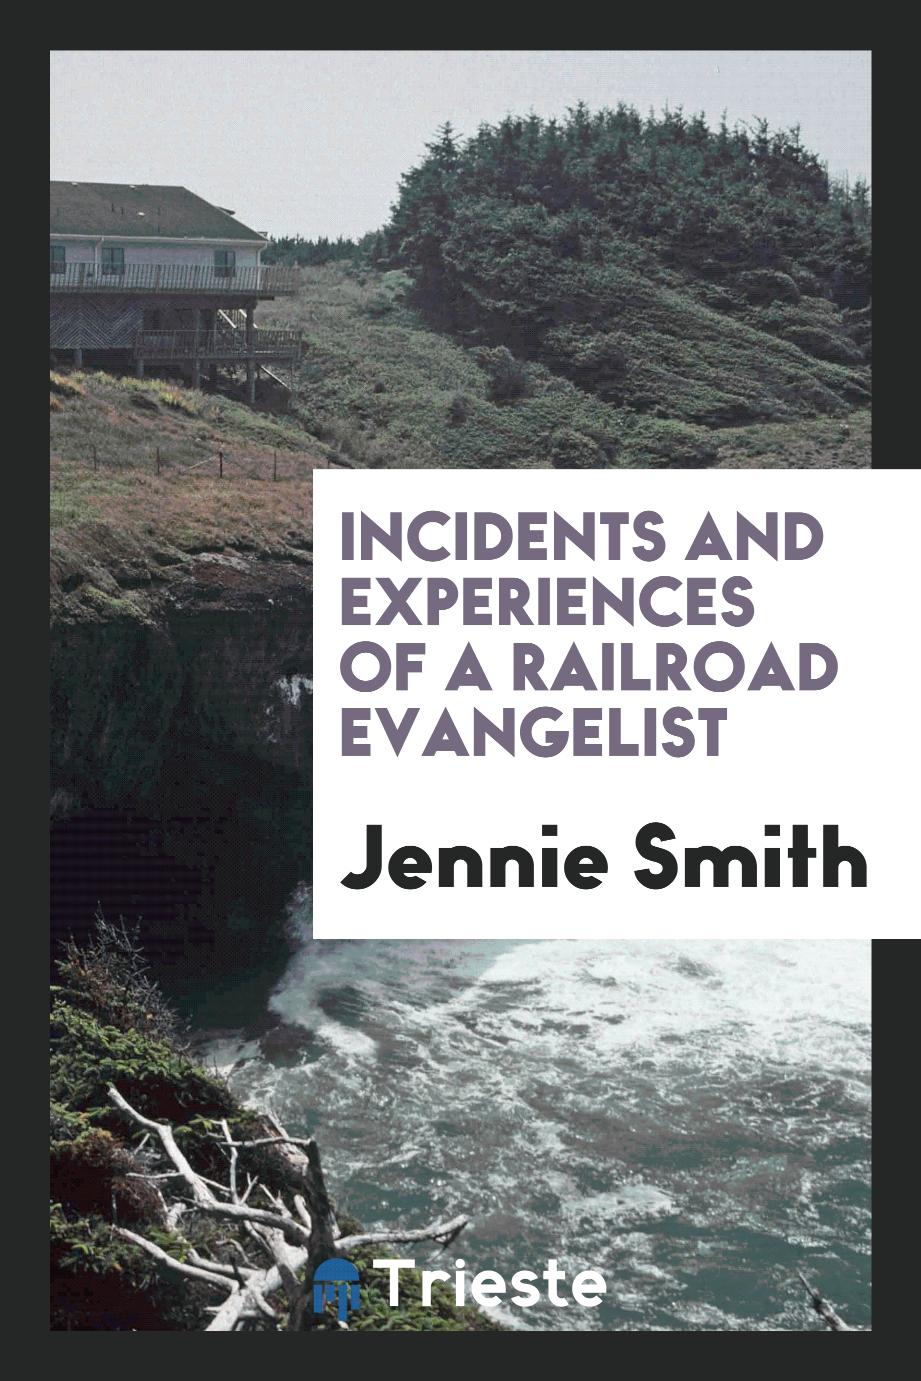 Incidents and experiences of a railroad evangelist